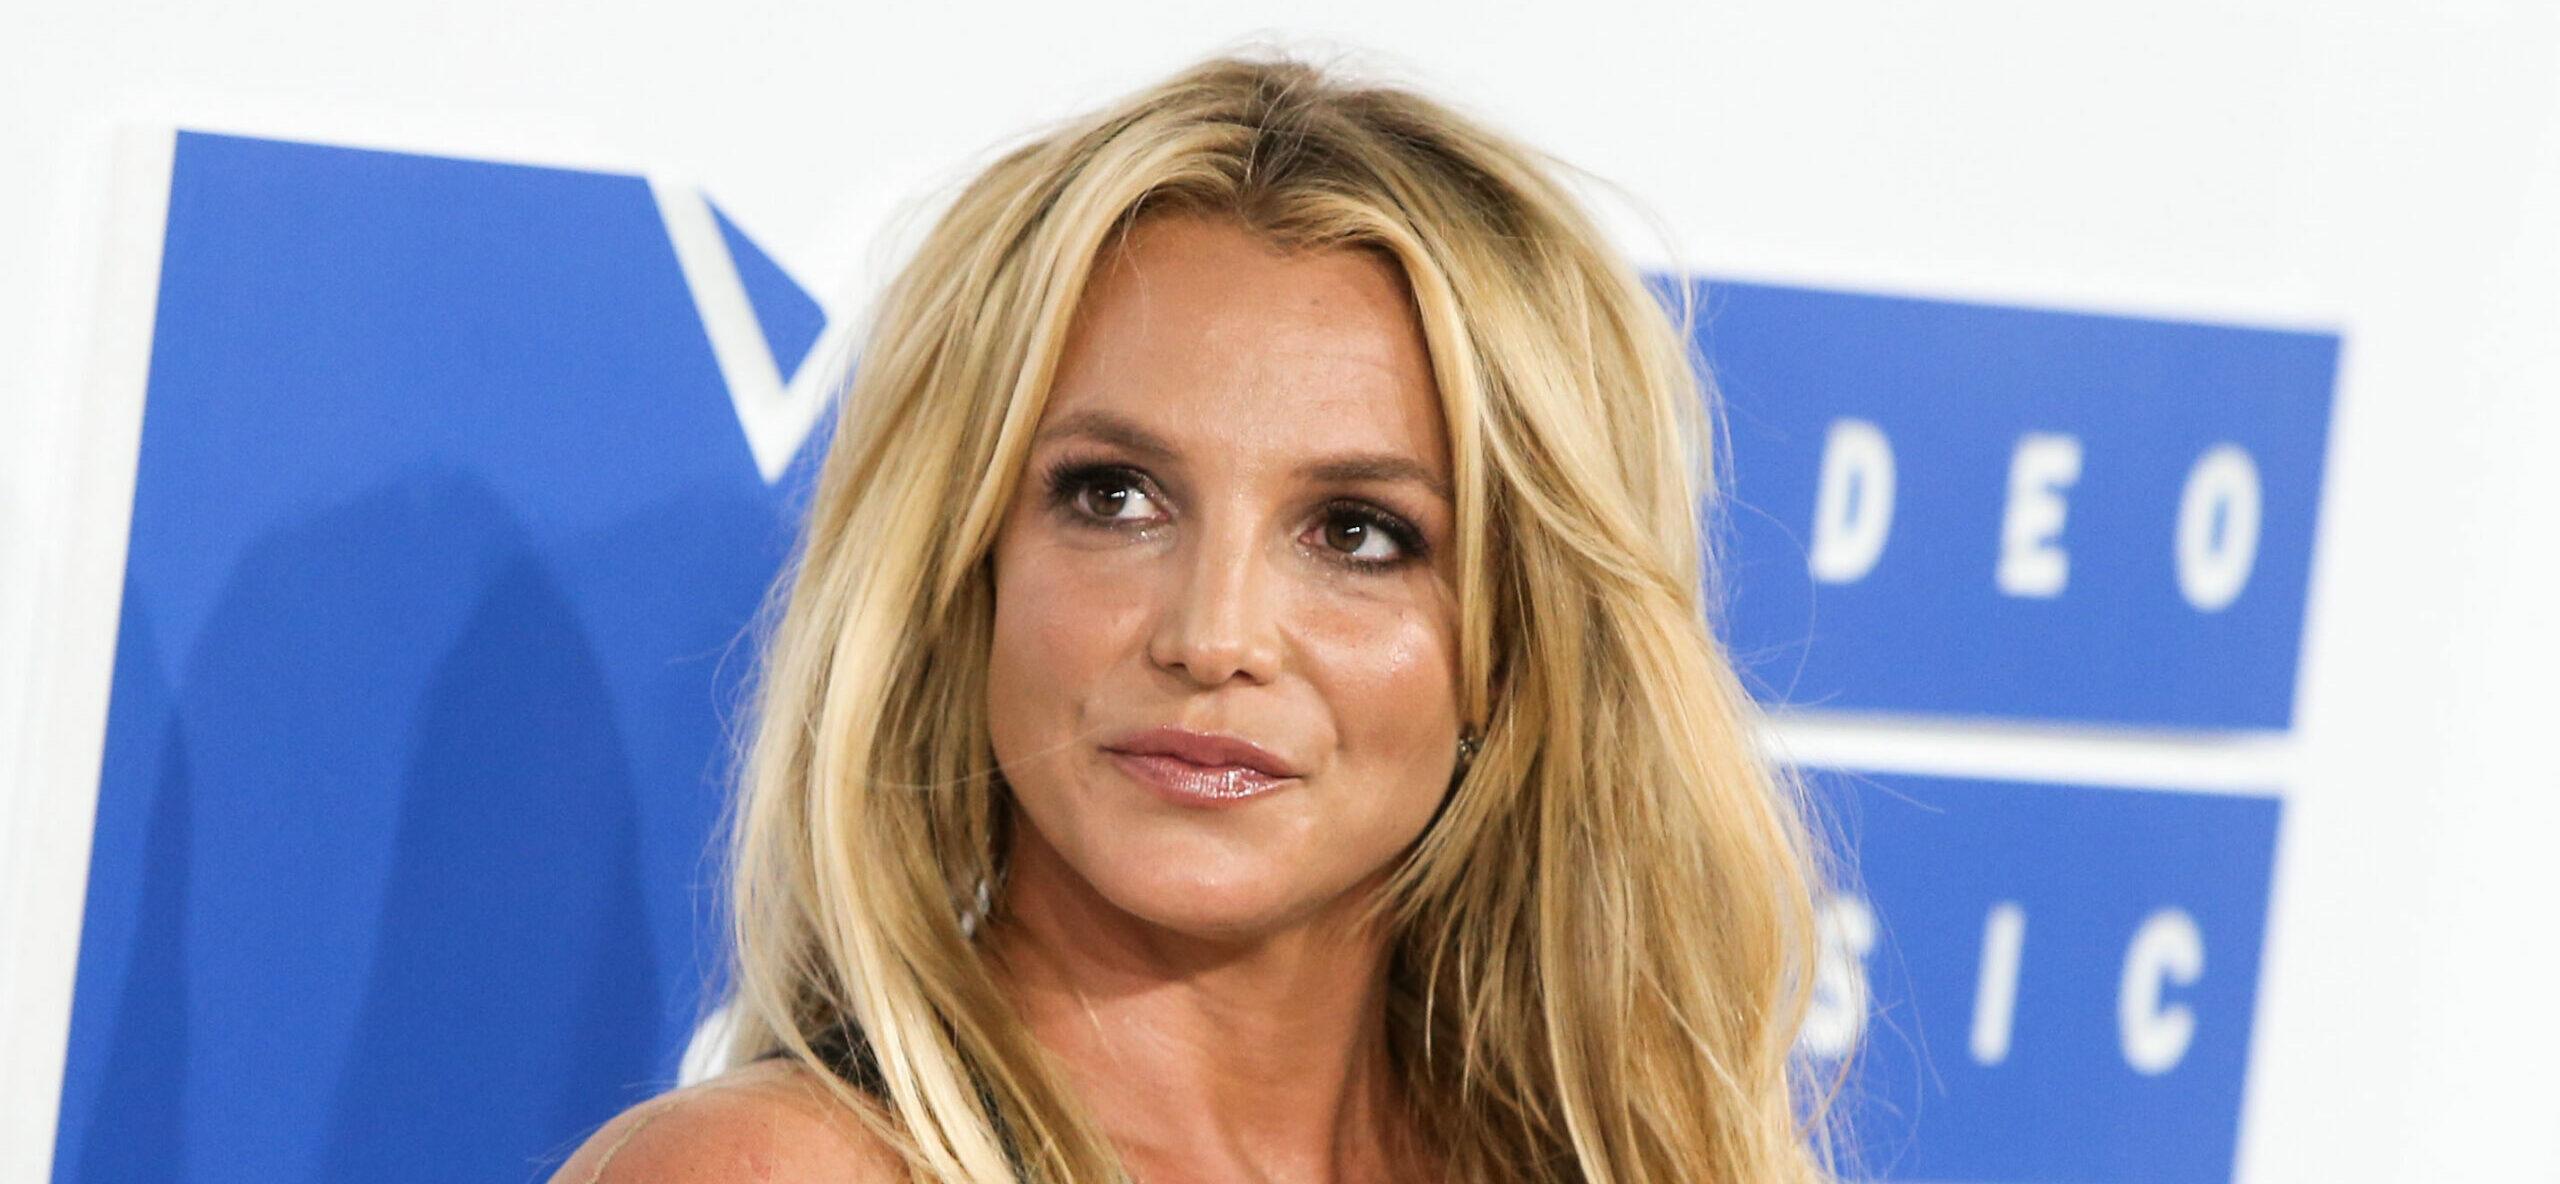 Britney Spears at the 2016 MTV Video Music Awards